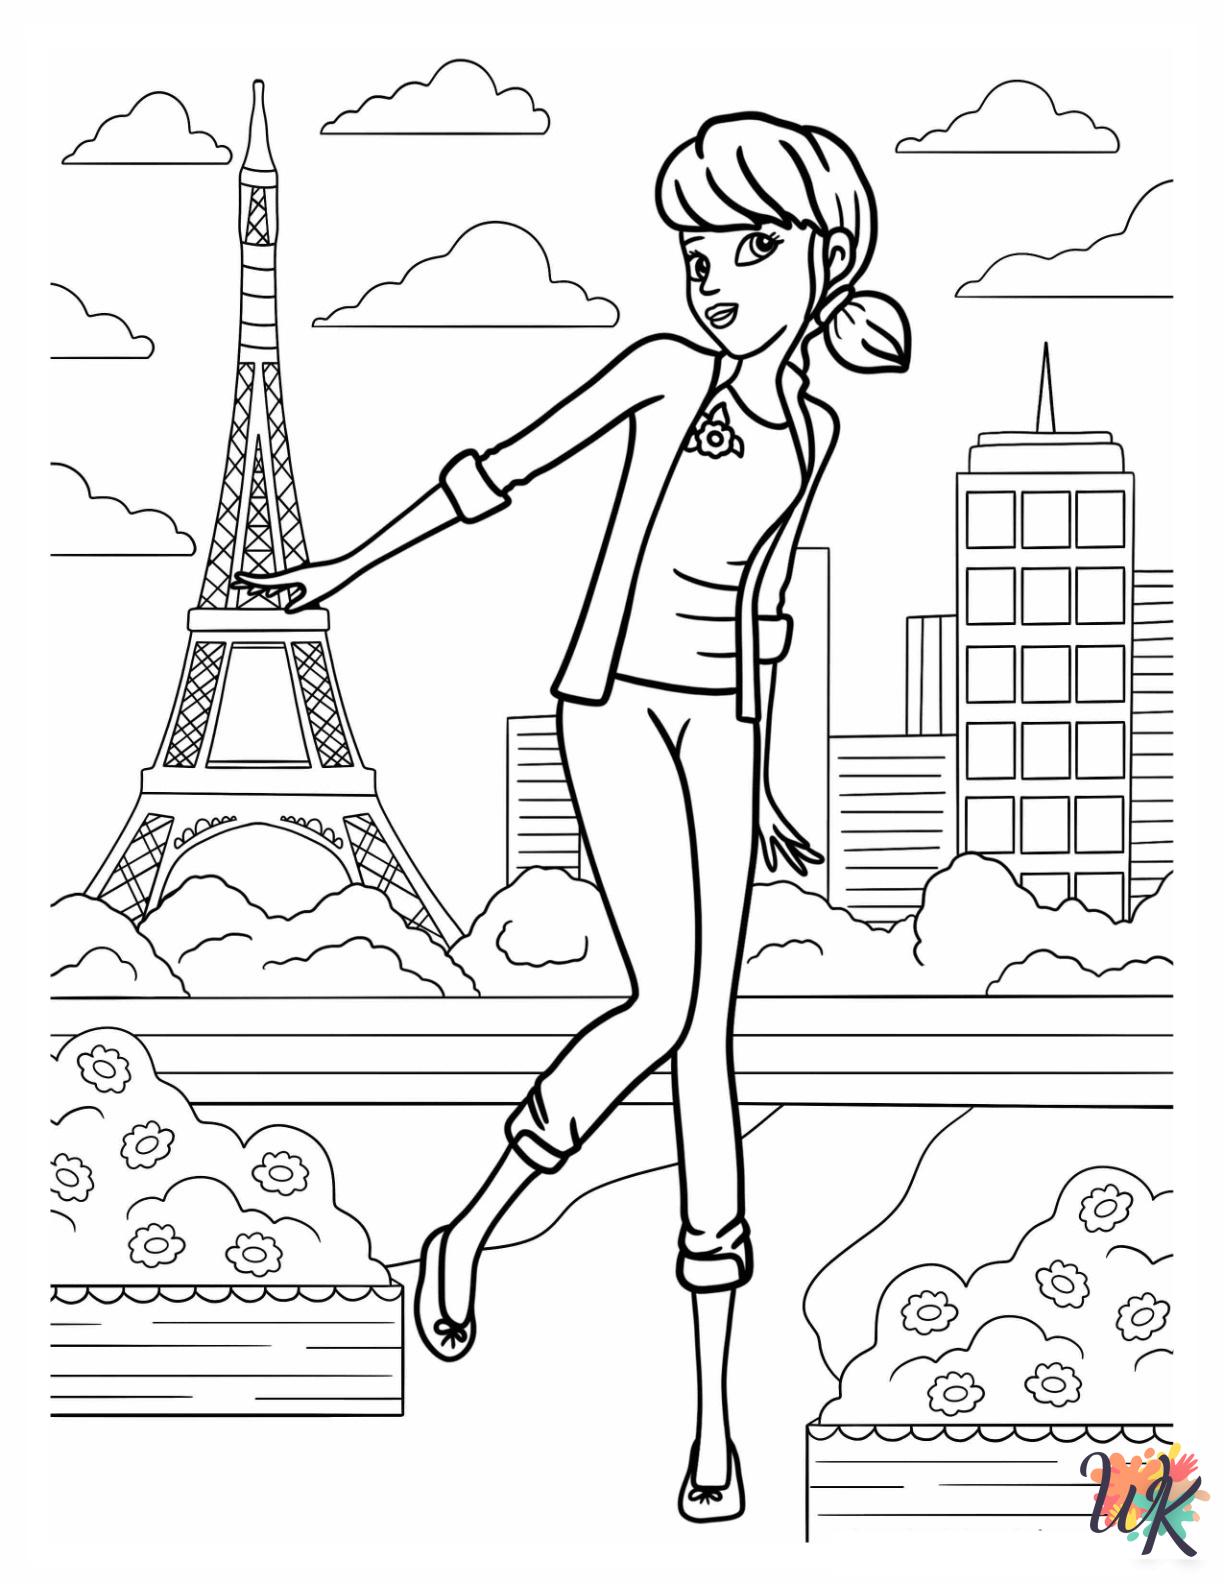 Miraculous Ladybug coloring pages to print